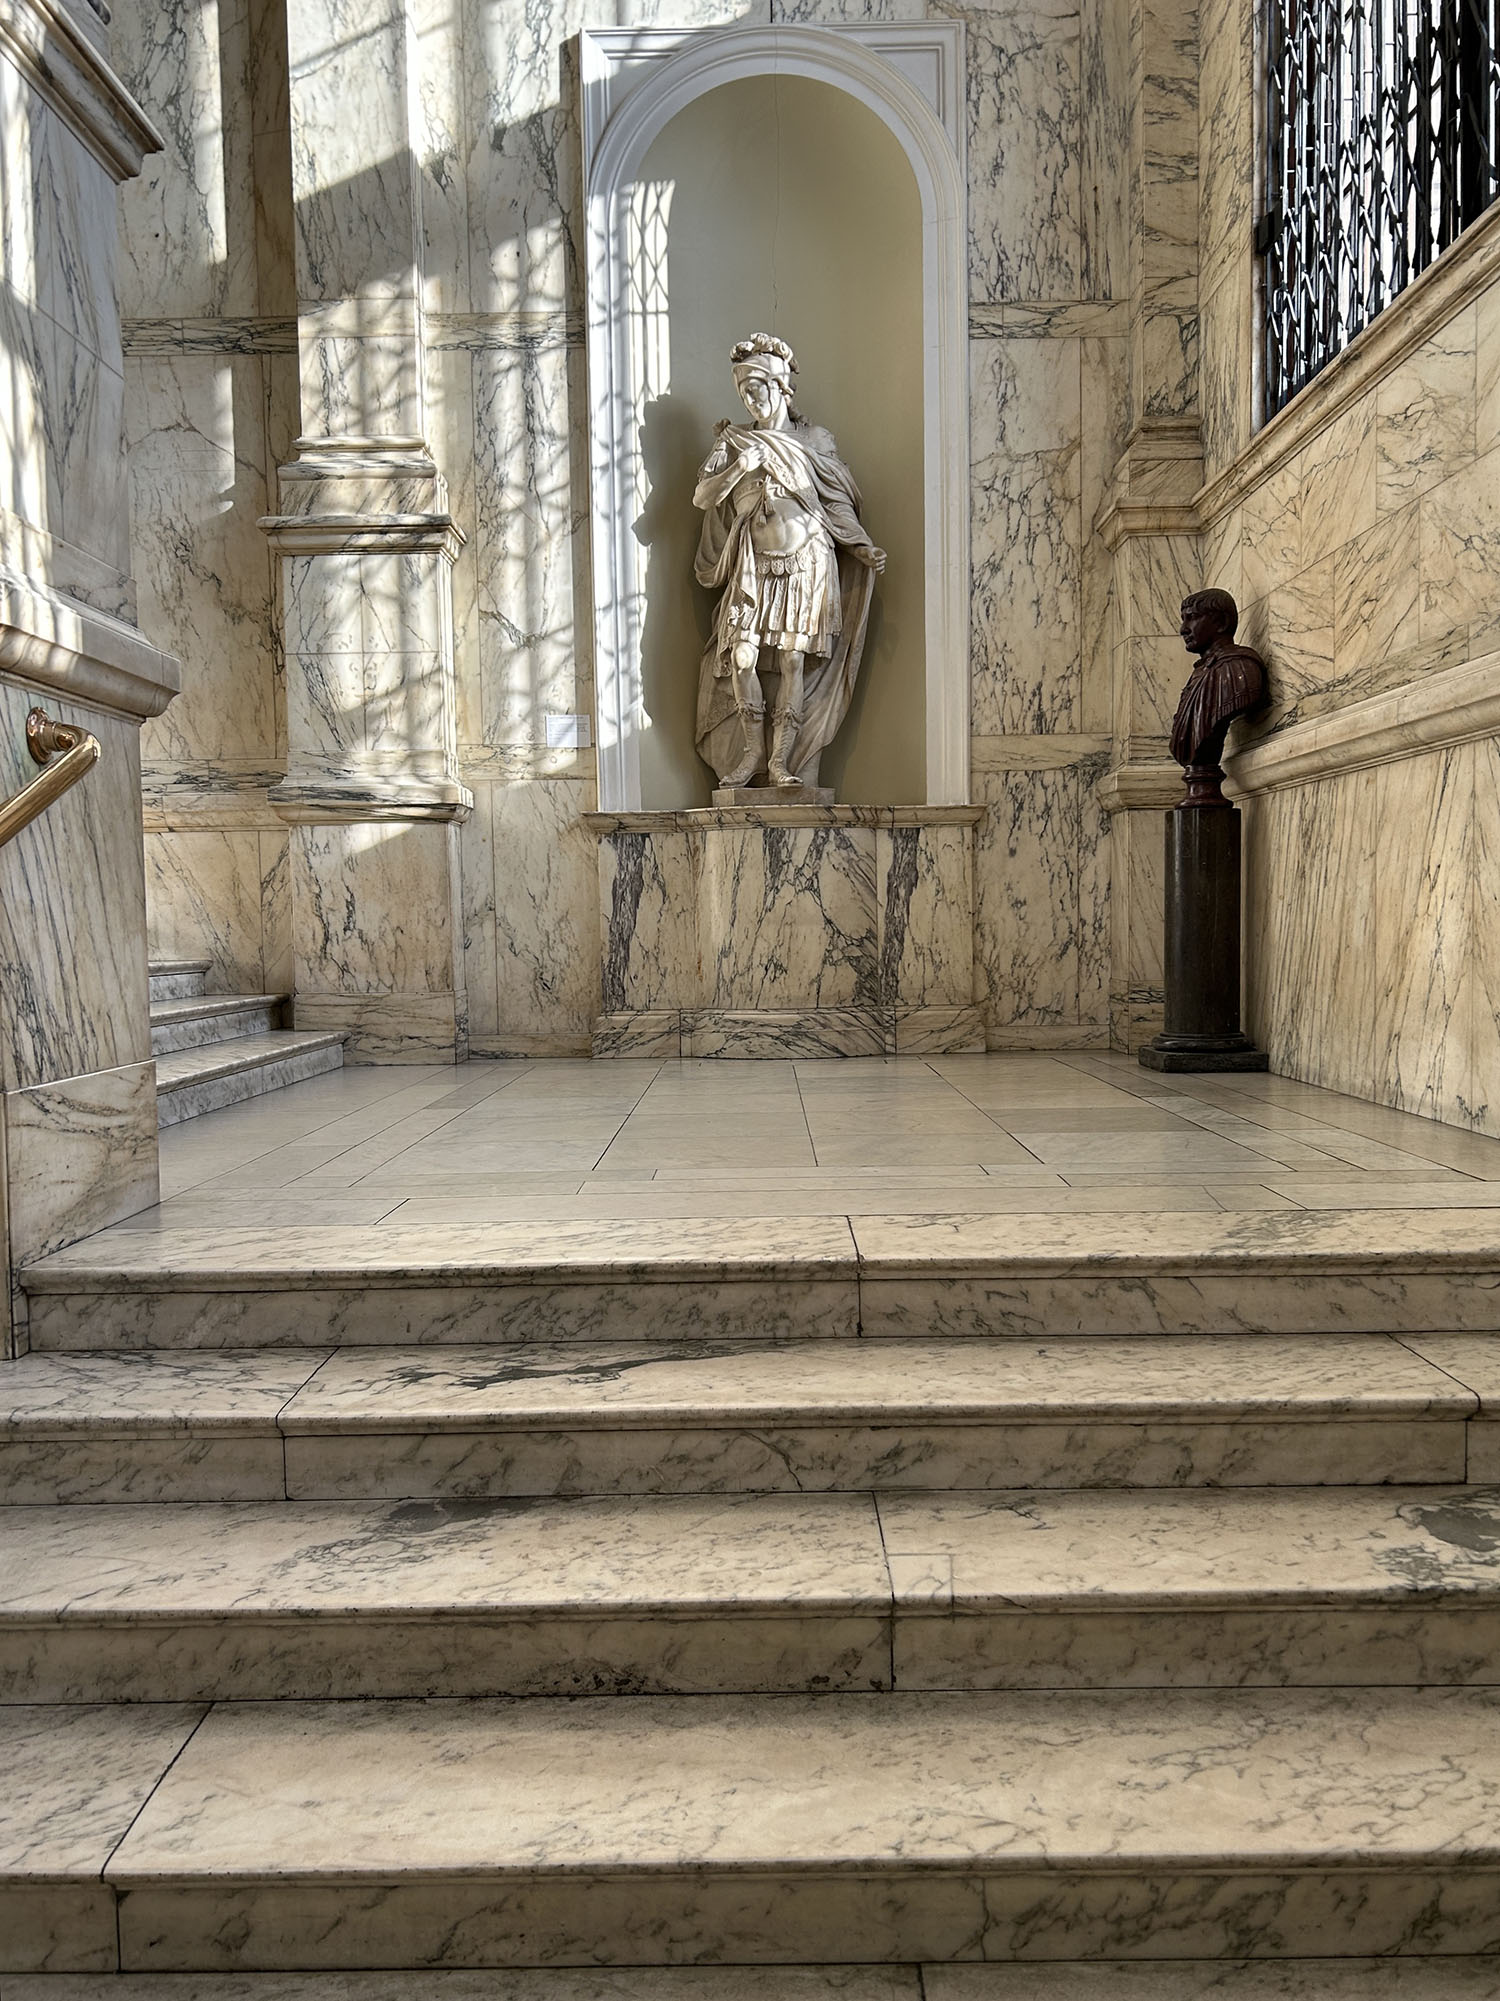 Coco & Voltaire - White marble staircase and statue at the Victoria and Albert Museum in London